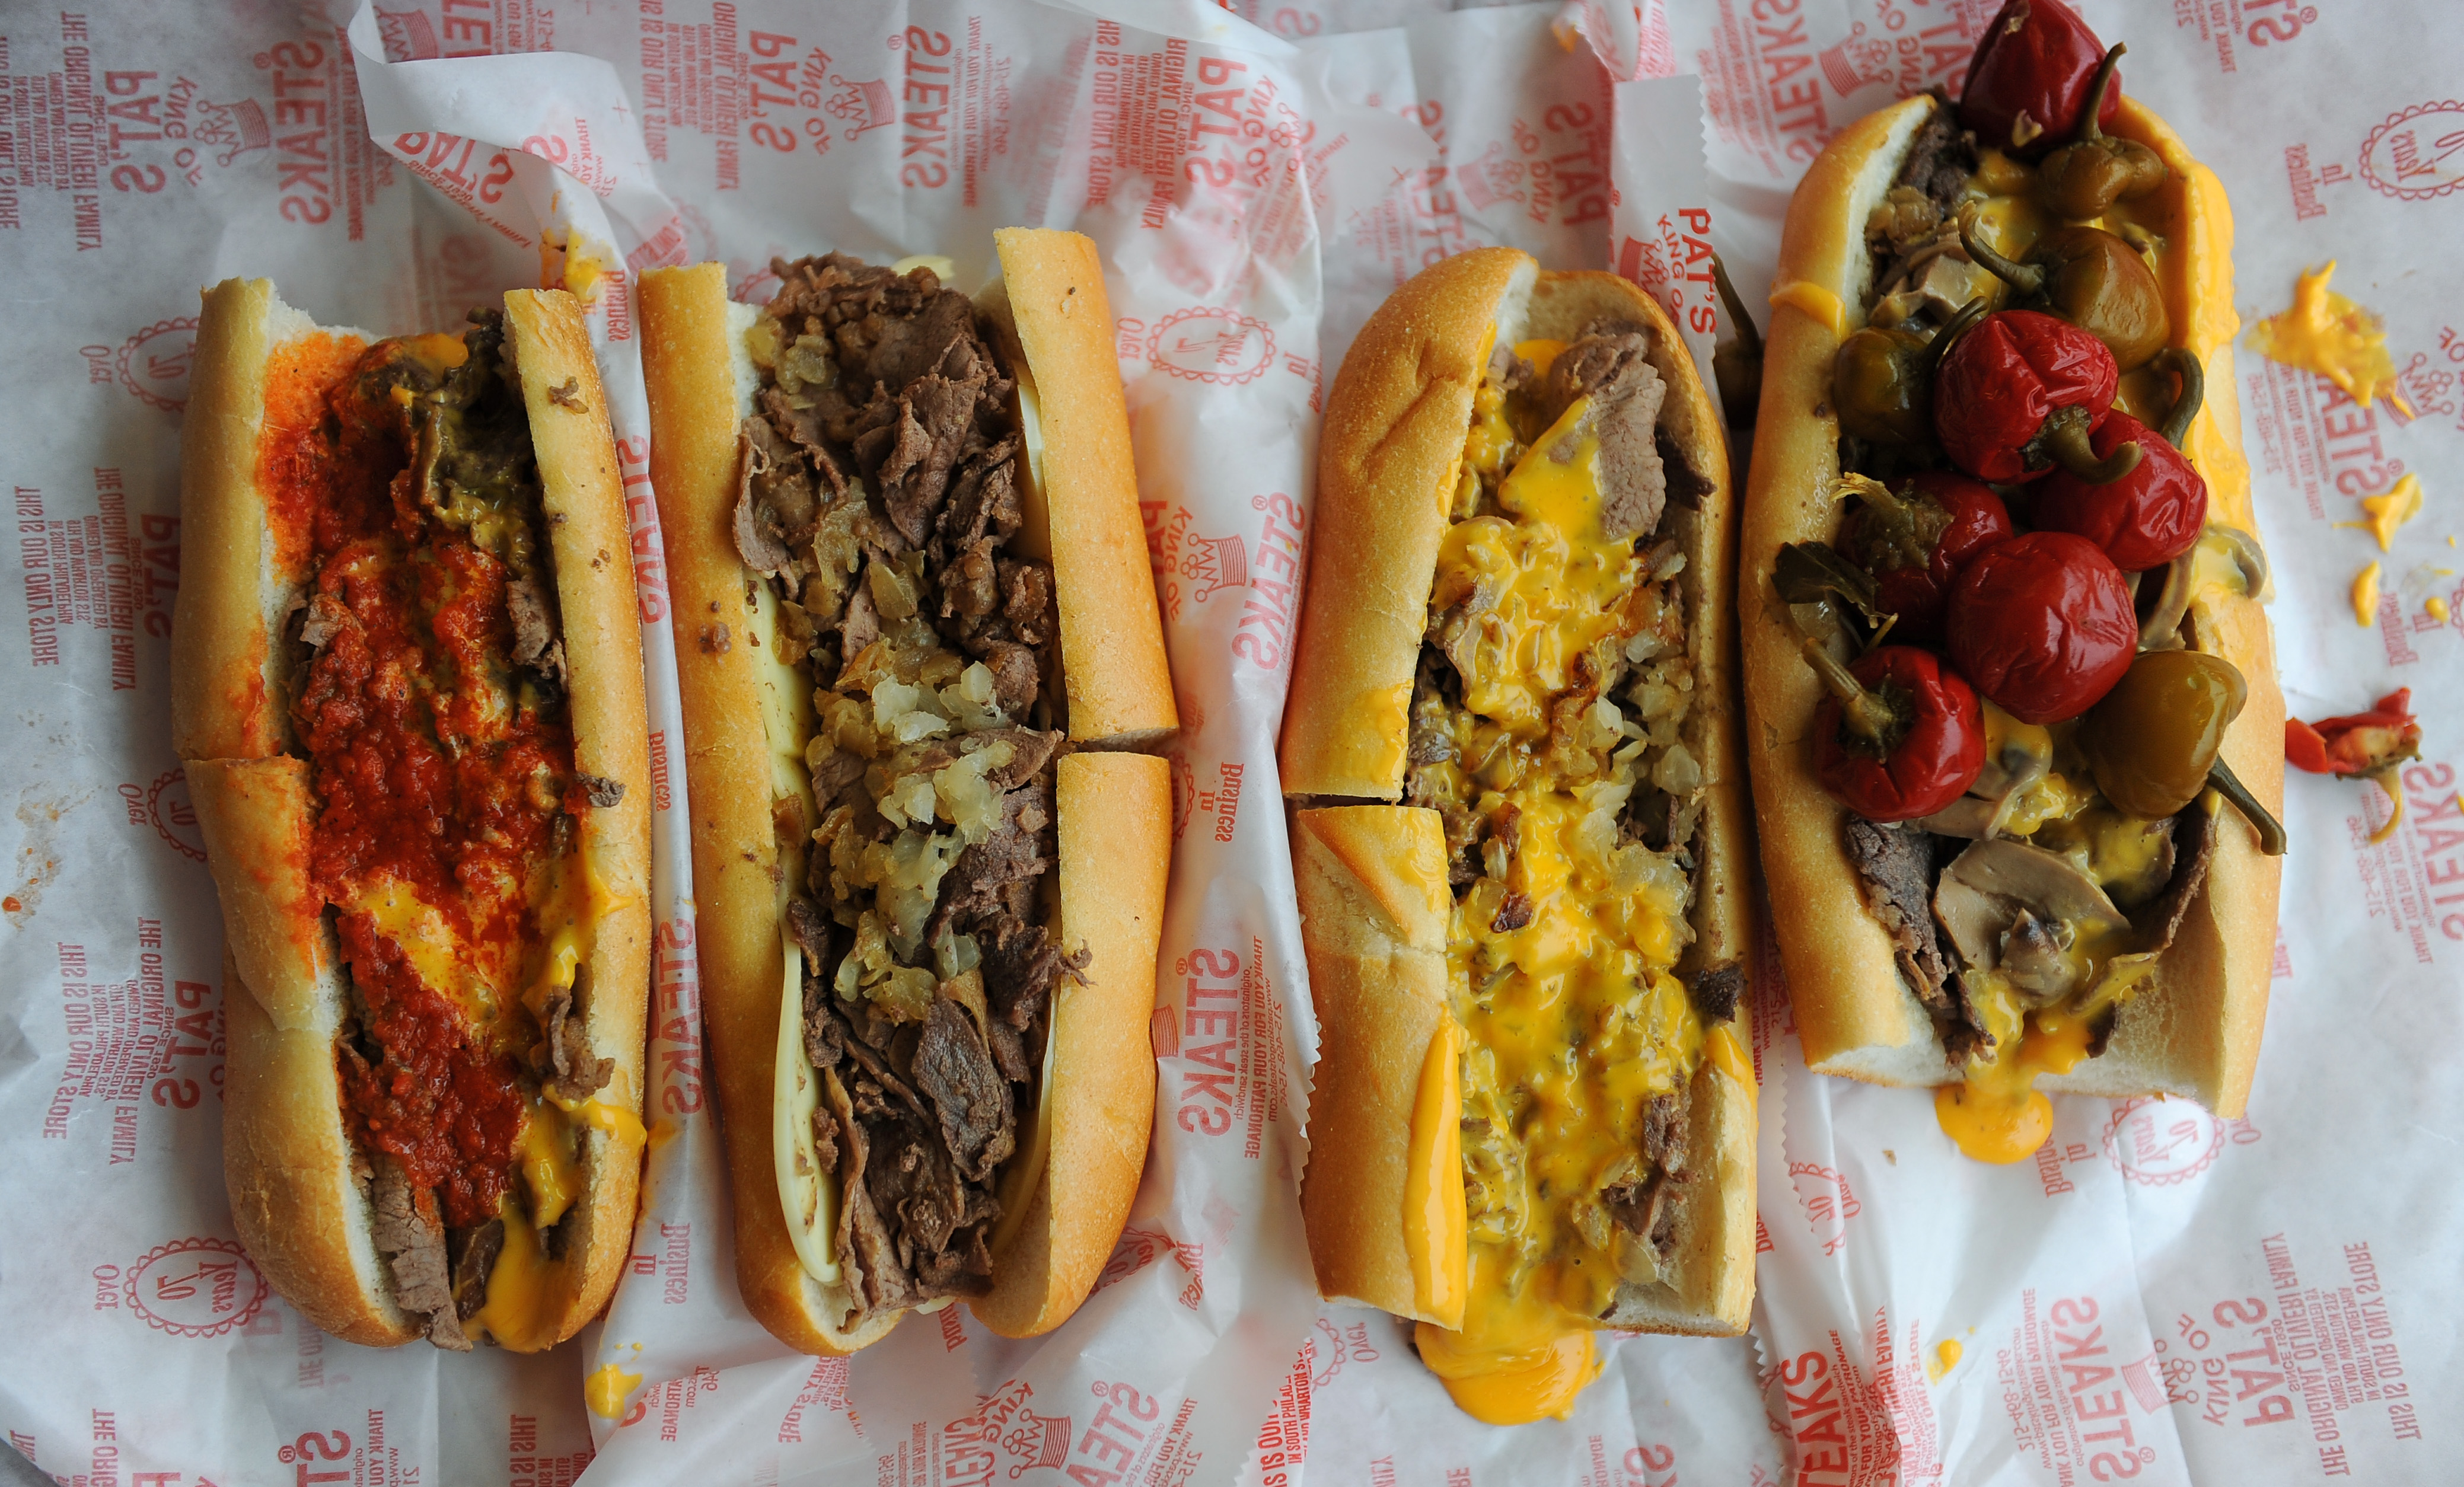 An overhead image of four cheesesteaks on white paper with red writing, one with peppers, one plain, one with Cheez Whiz, and one with marina sauce.